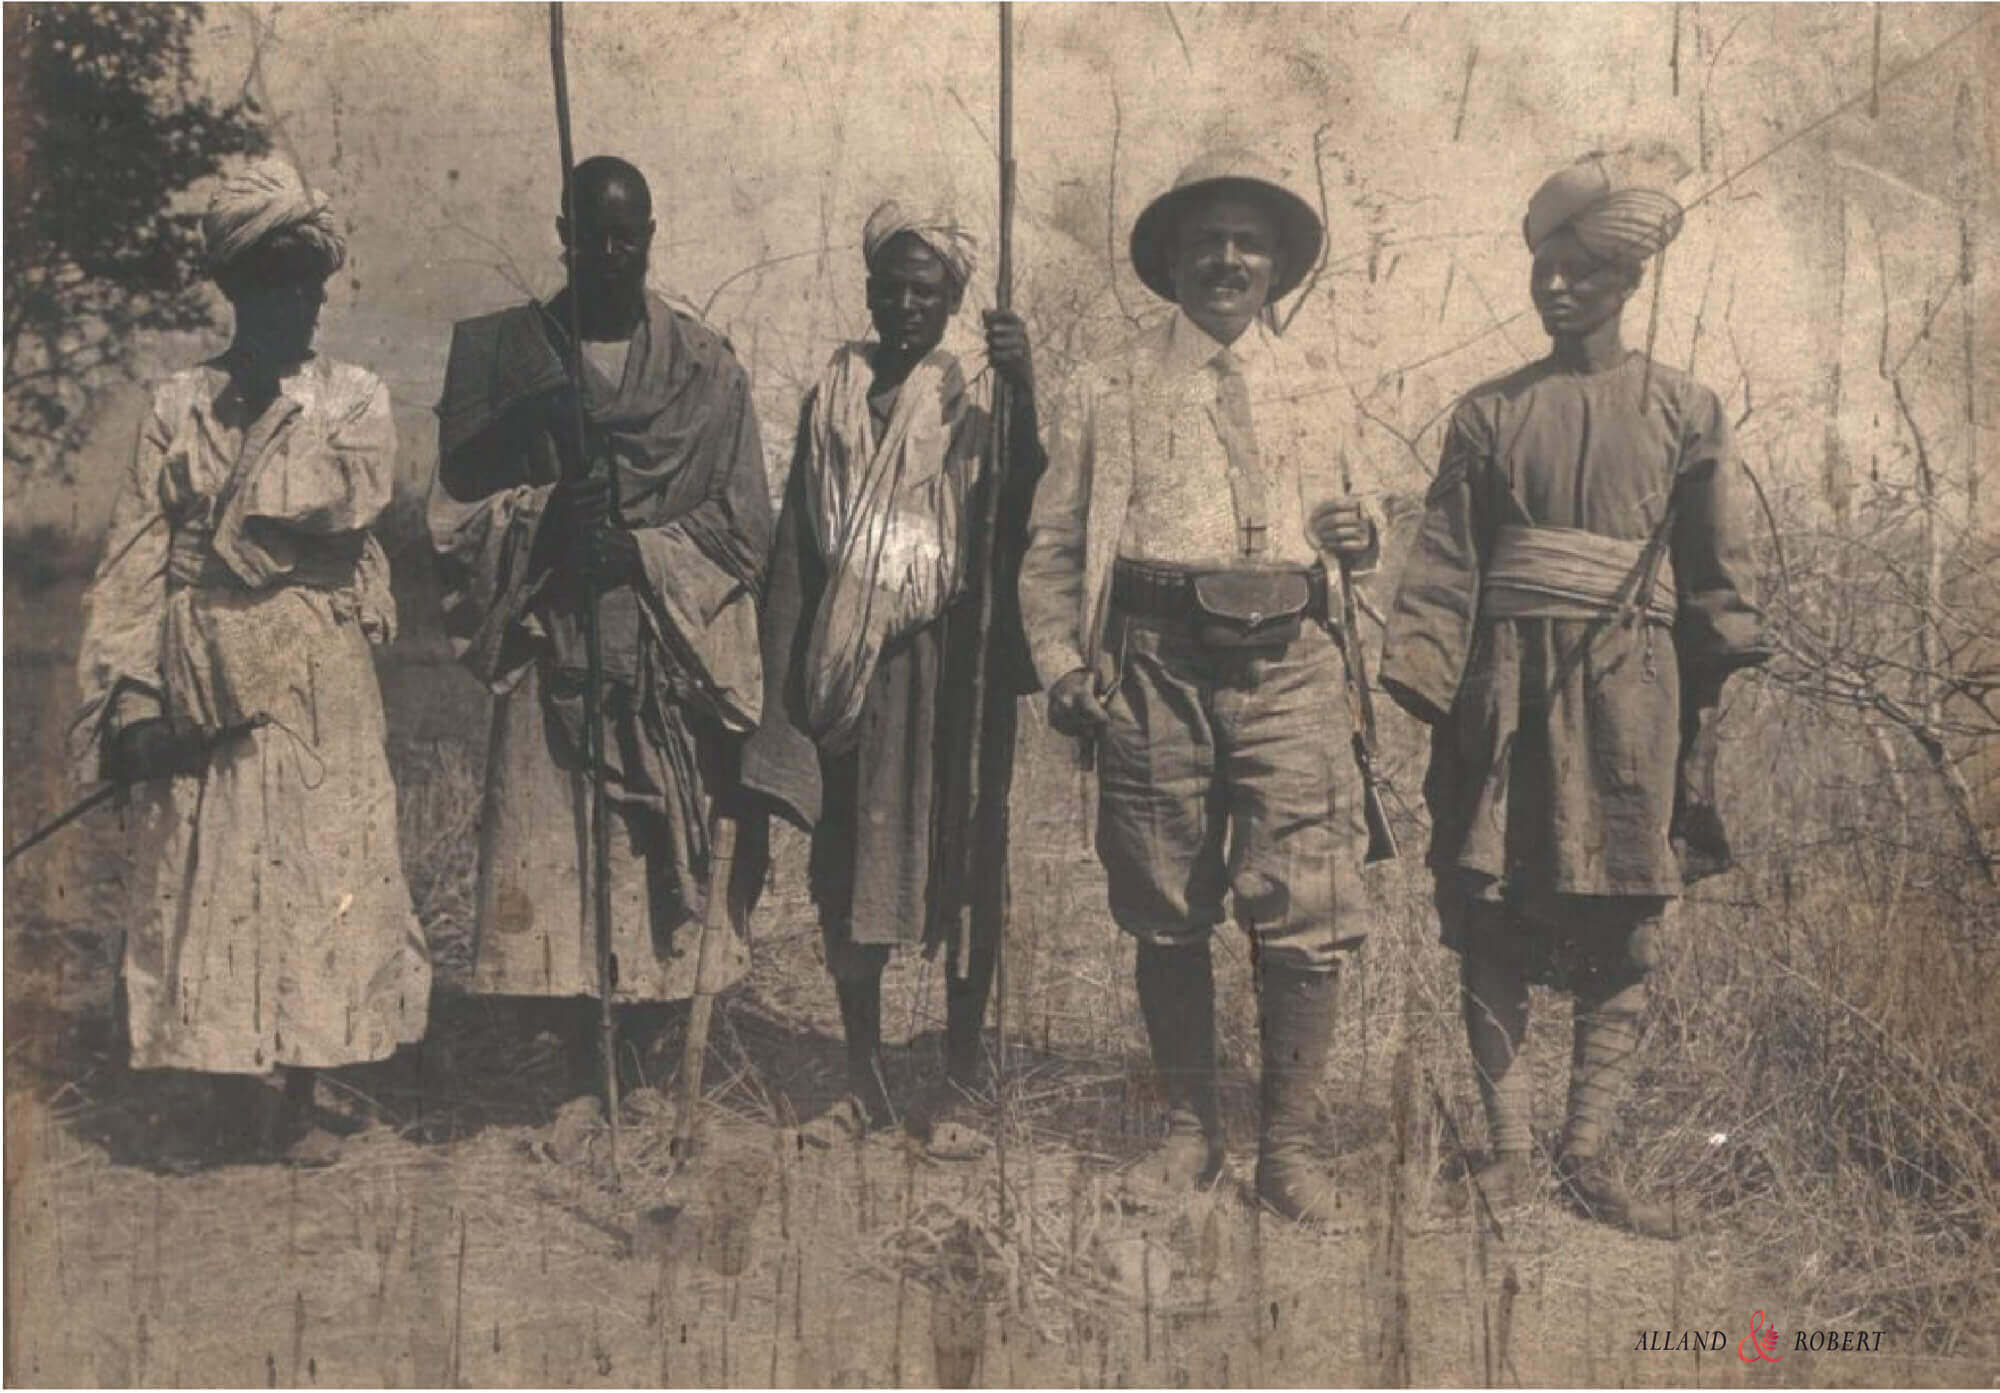 PICTURE: Founder Francisque Alland in Africa, courtesy of Alland and Robert